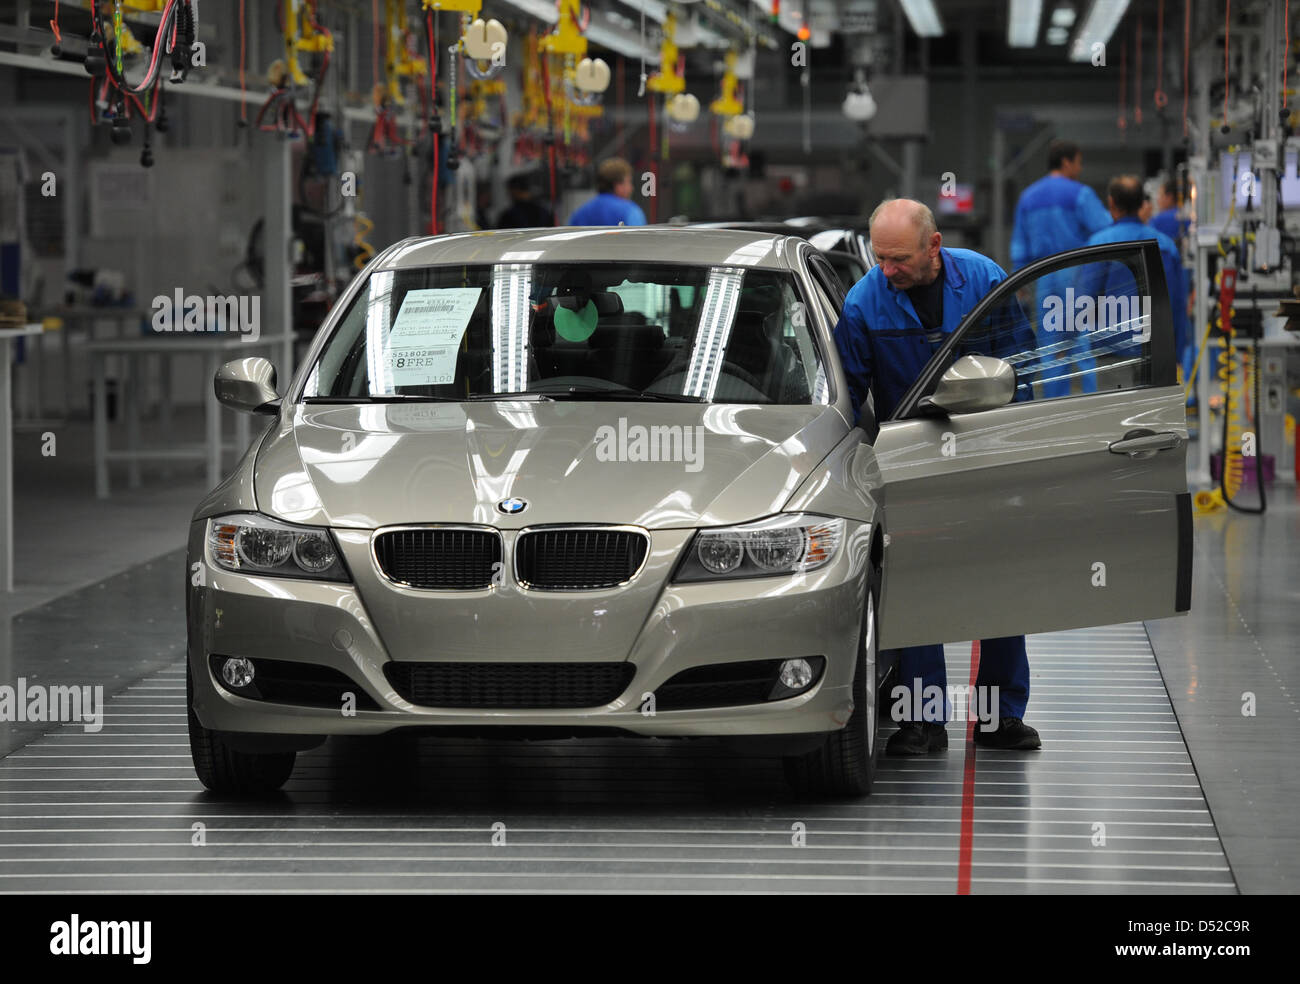 (FILE) - A picture dated 26 July 2010 shows a man working on the production of a BMW at the BMW factory in Regensburg, Germany. BMW presents its business figures of the third quarter 2010 on 03 November 2010. Photo: Armin Weigel Stock Photo